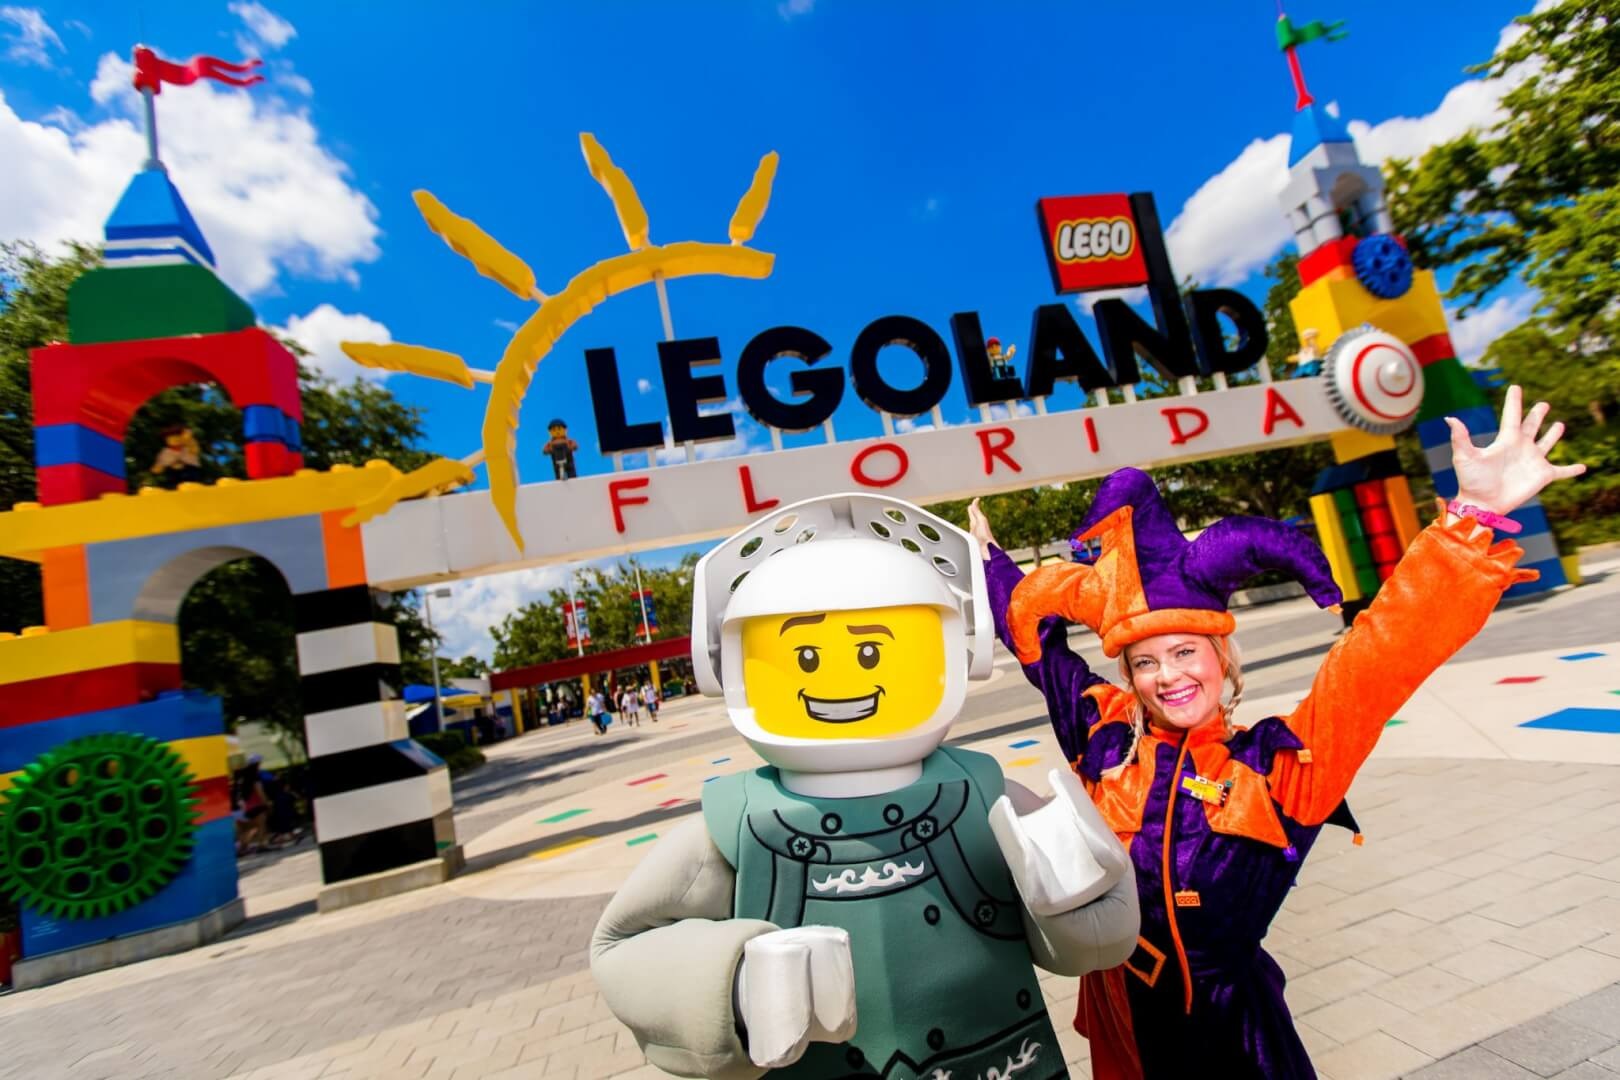 5 Tips for a Great Experience at Legoland Florida